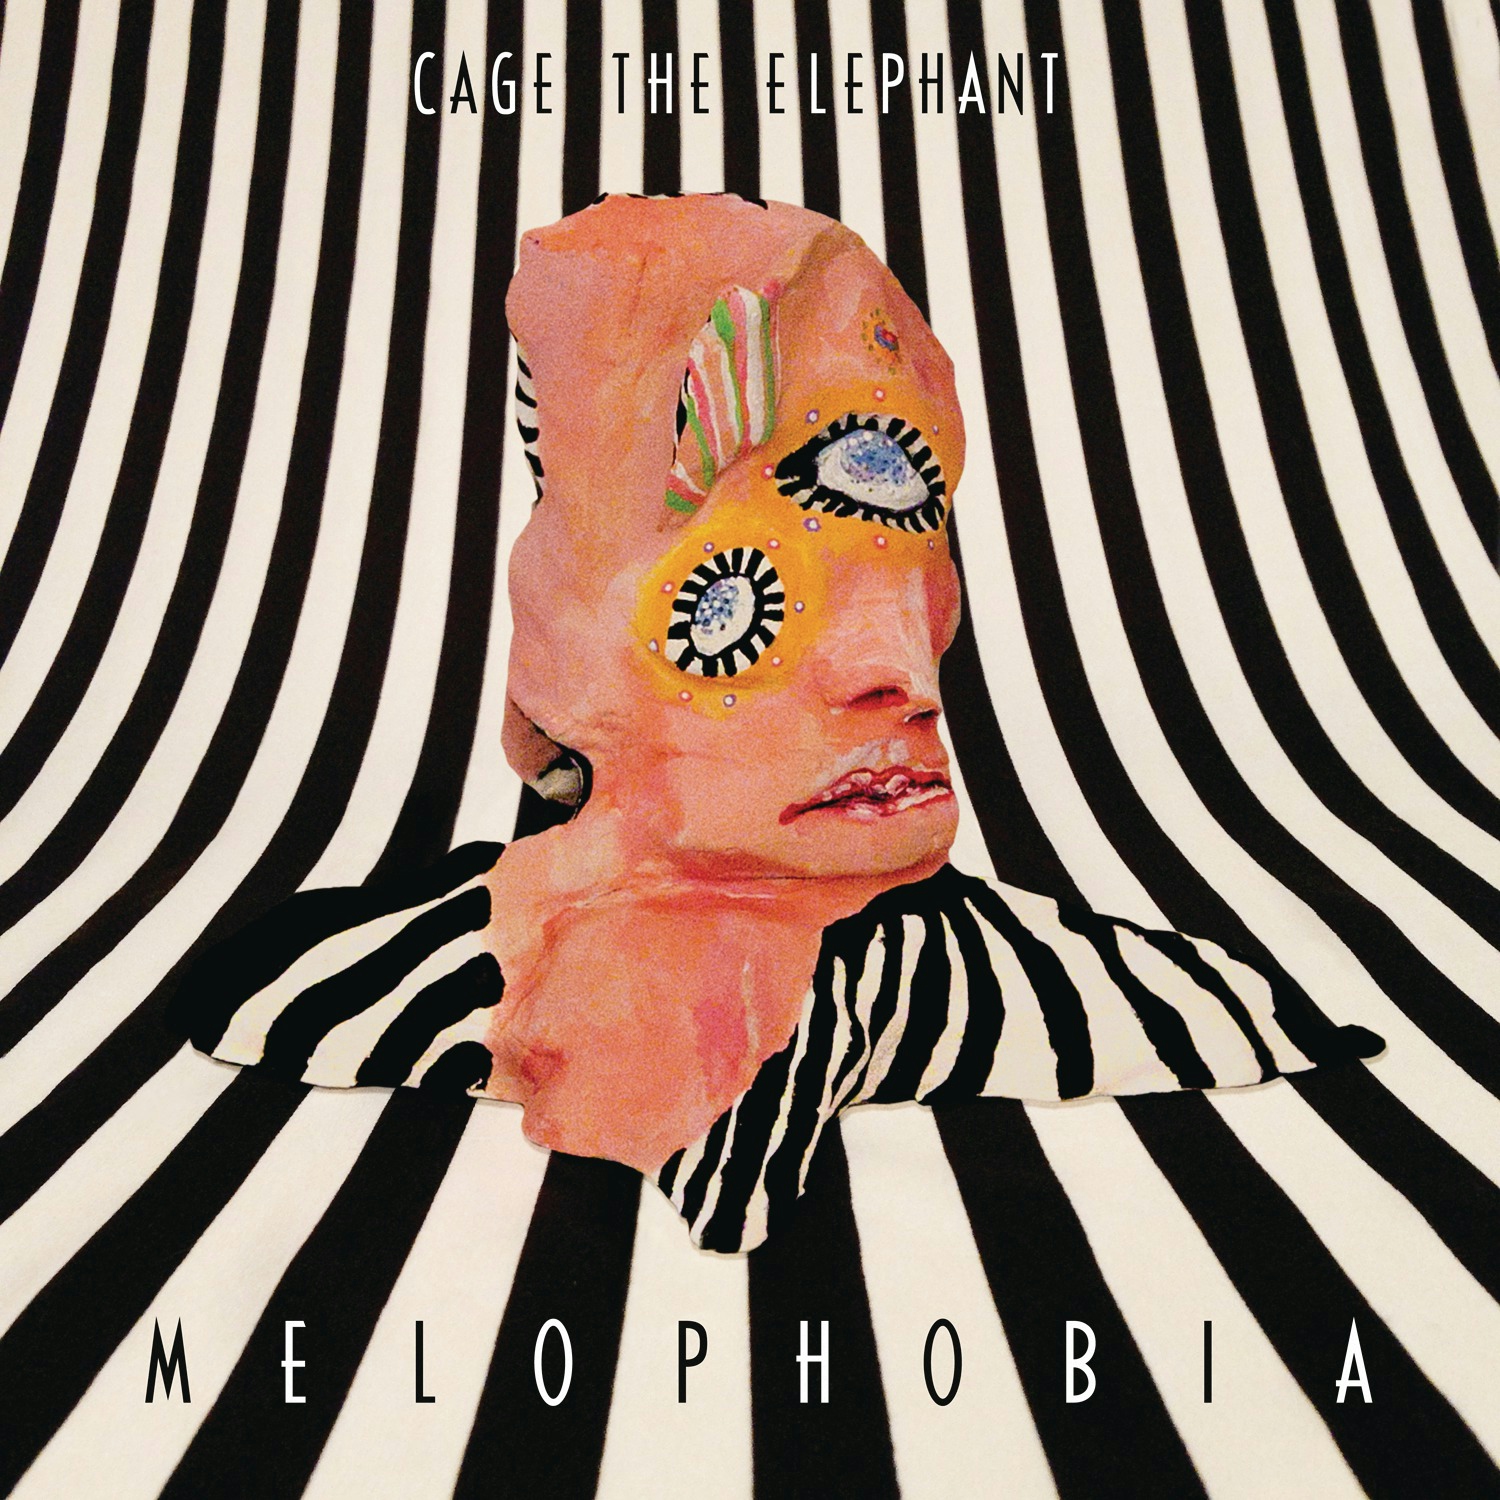 Album artwork for Melophobia by Cage The Elephant